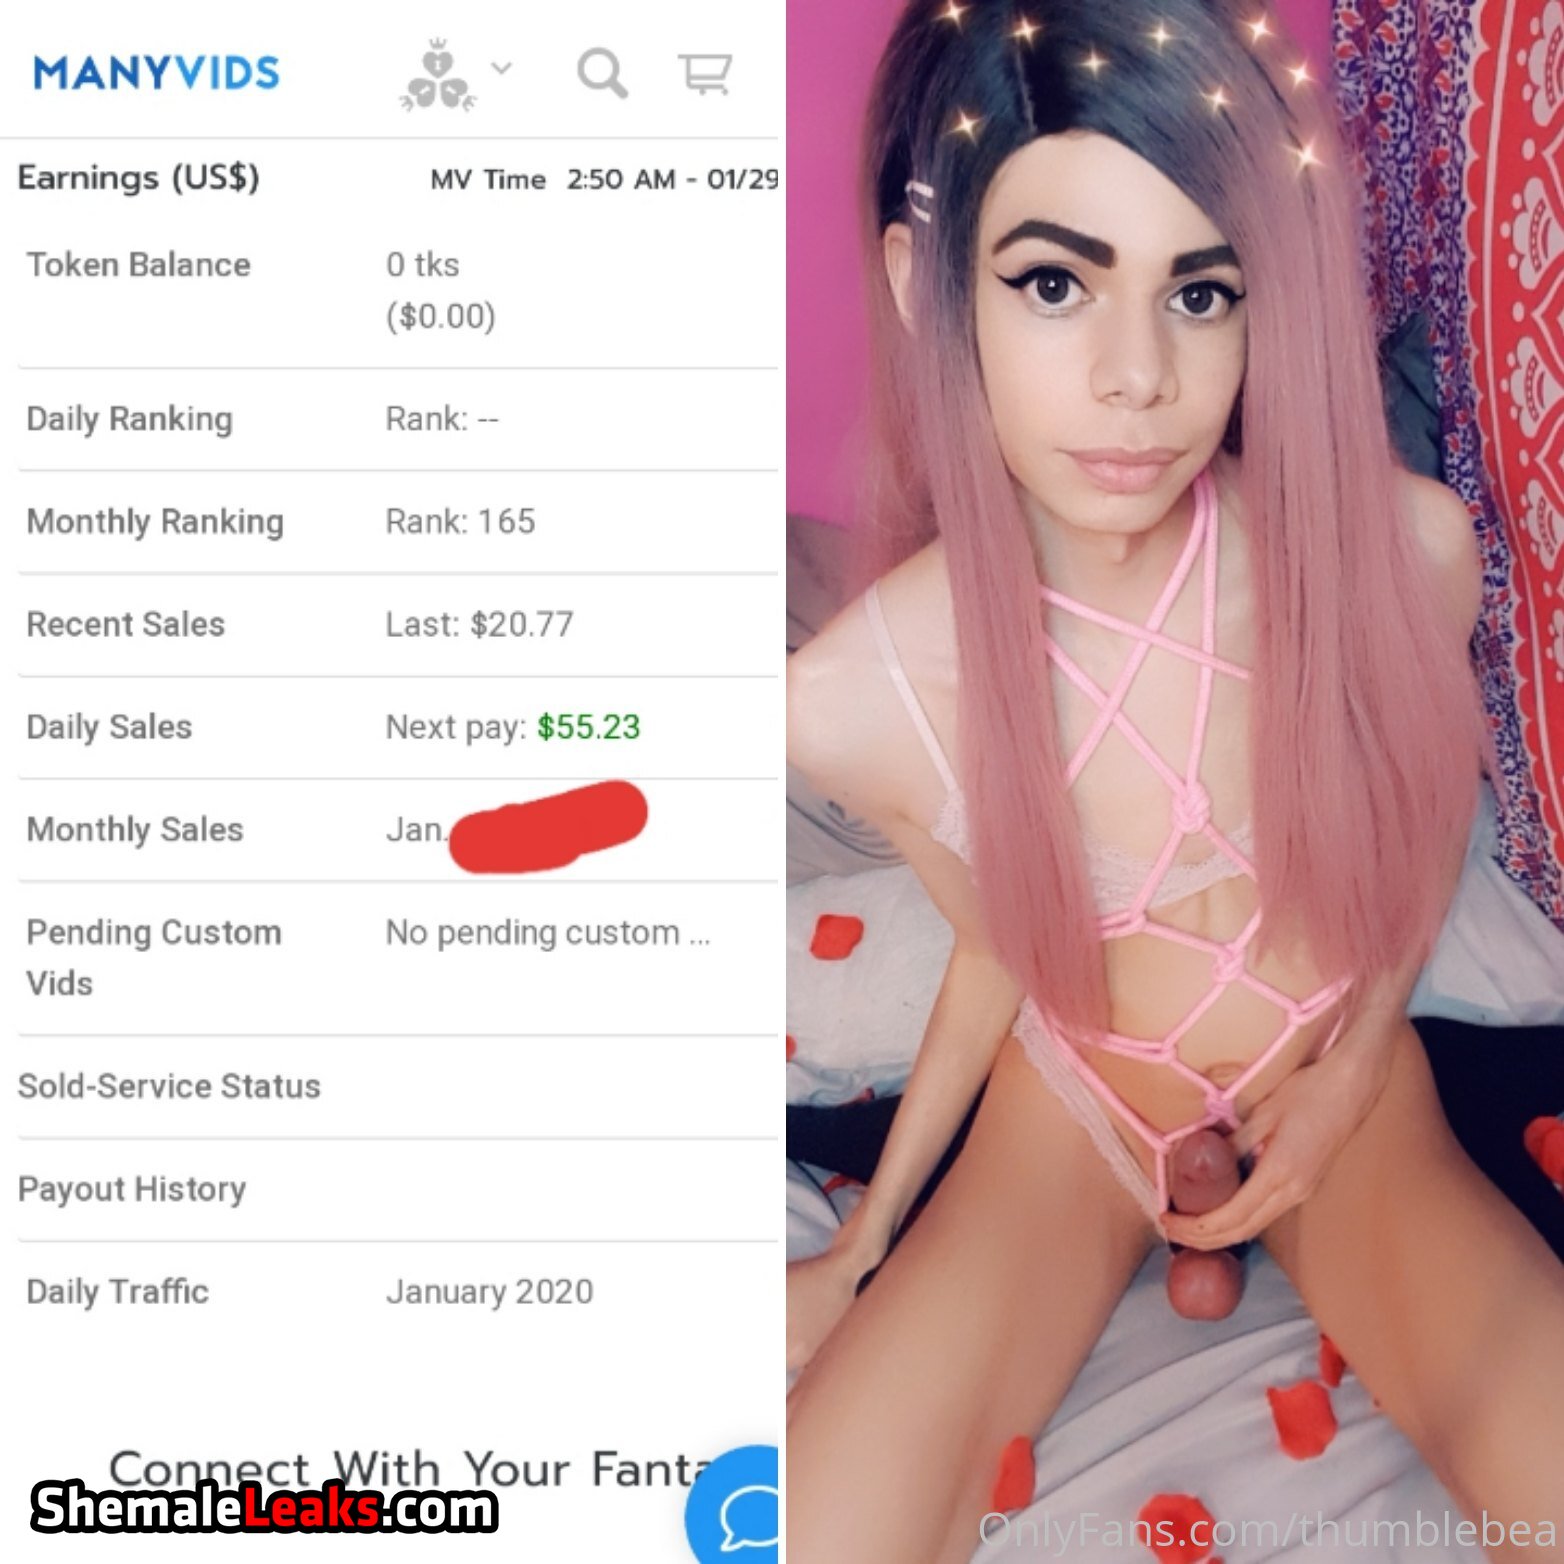 Thumblebea Onlyfans Leaks (82 Photos and 7 Videos)